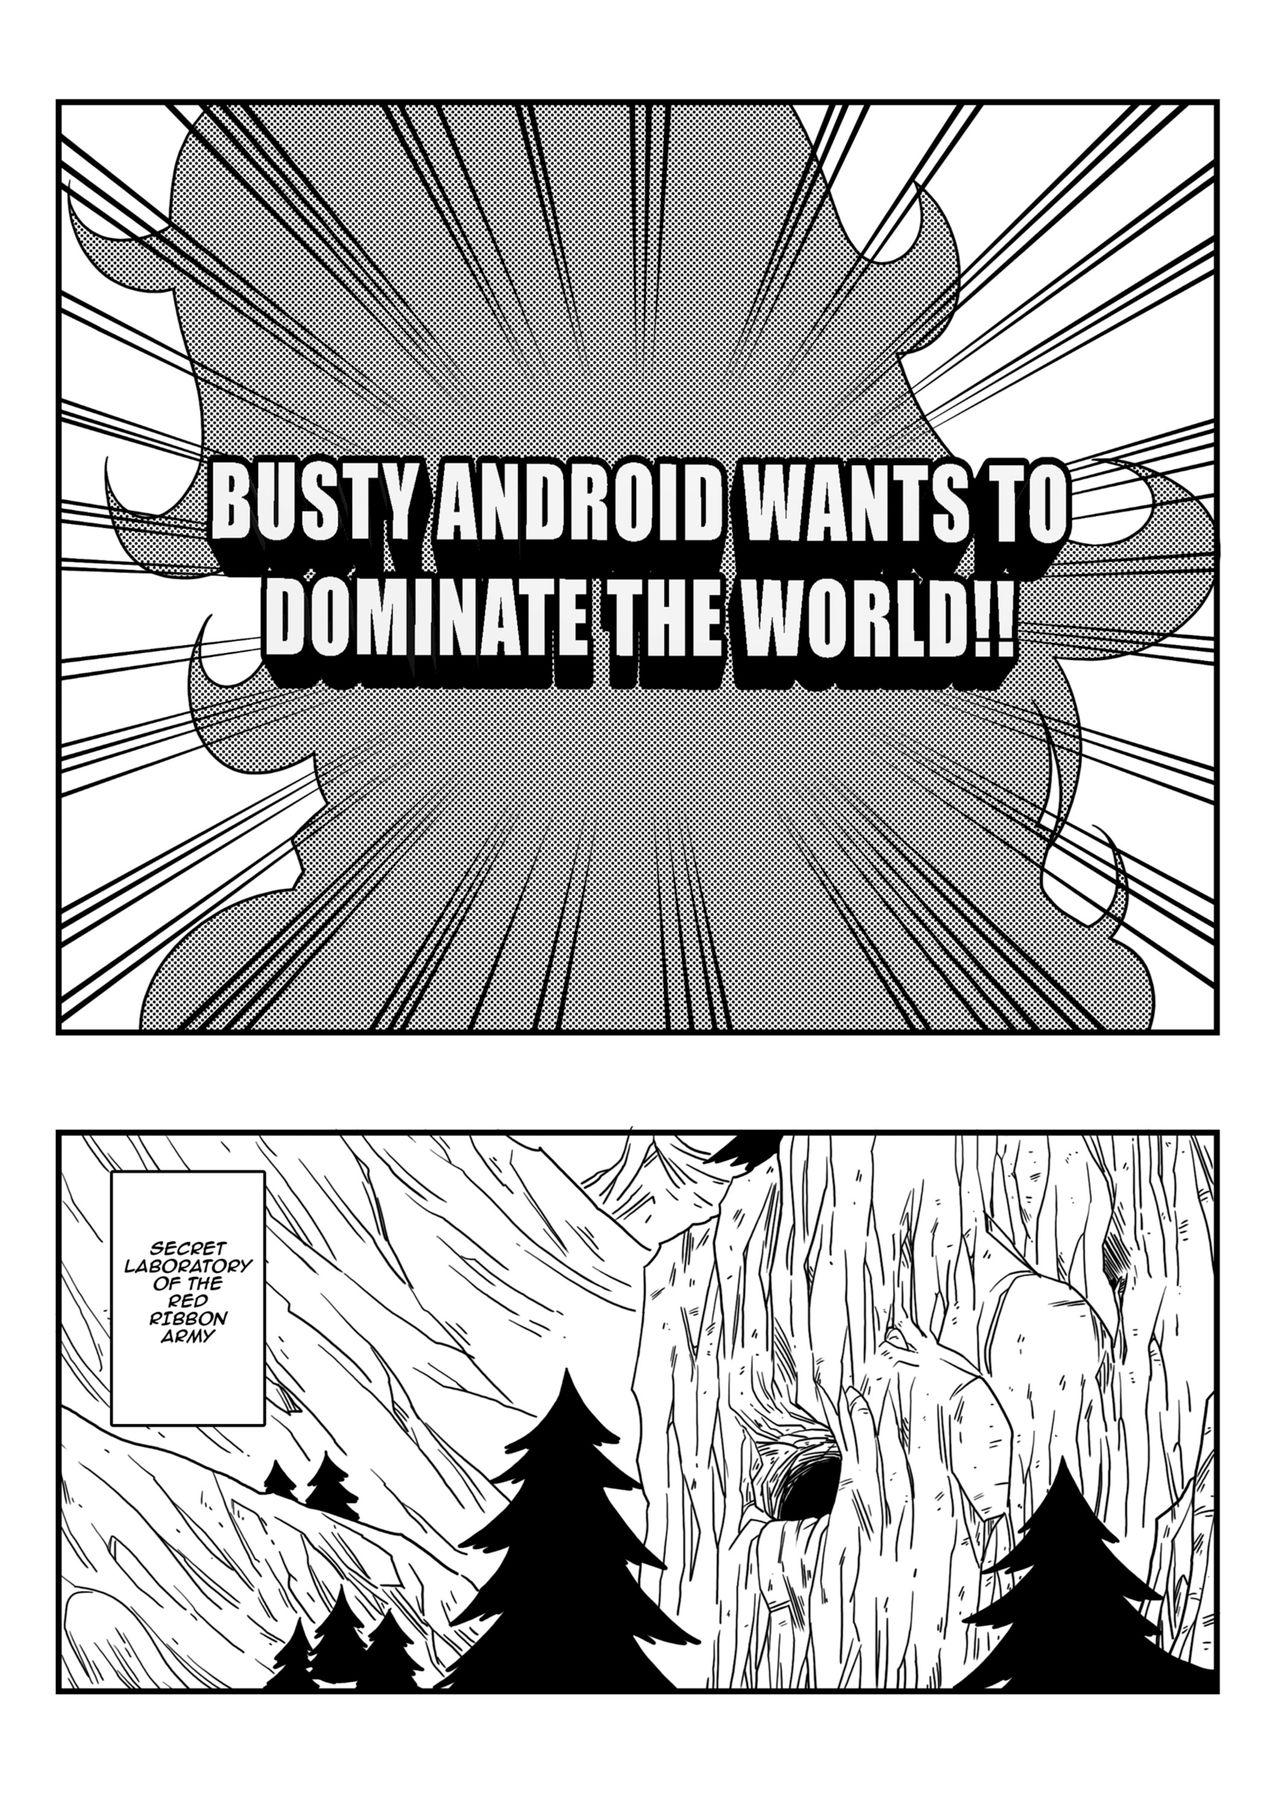 Kyonyuu Android Sekai Seiha o Netsubou!! Android 21 Shutsugen!! | Busty Android Wants to Dominate the World! 2